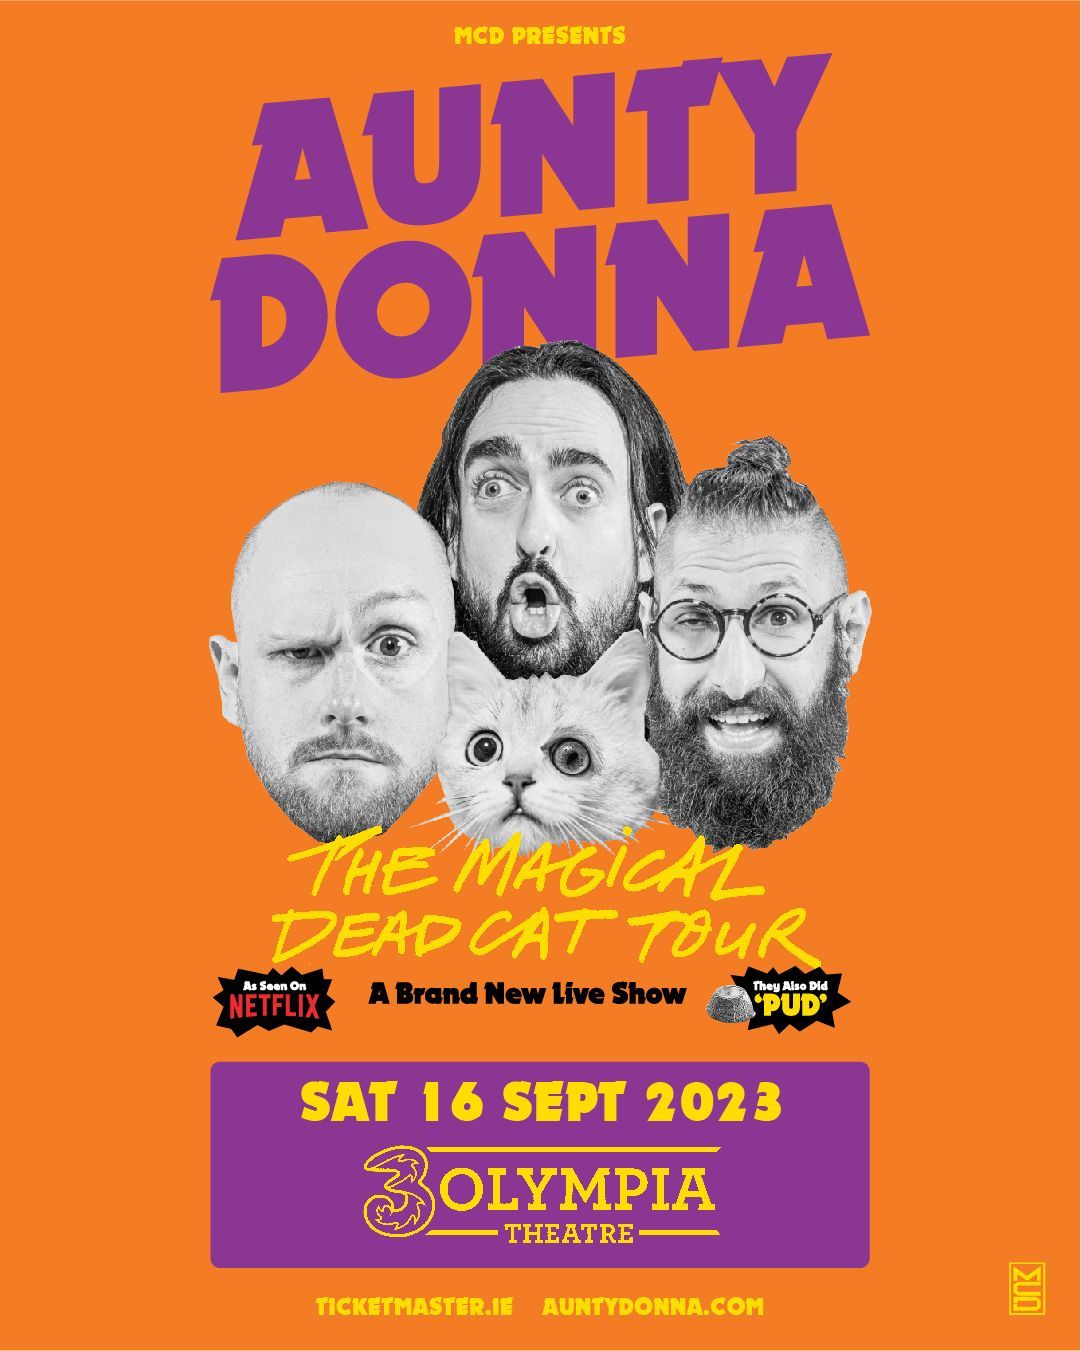 AUNTY DONNA  BRAND-NEW LIVE SHOW  THE MAGICAL DEAD CAT TOUR  3OLYMPIA DUBLIN DATE CONFIRMED